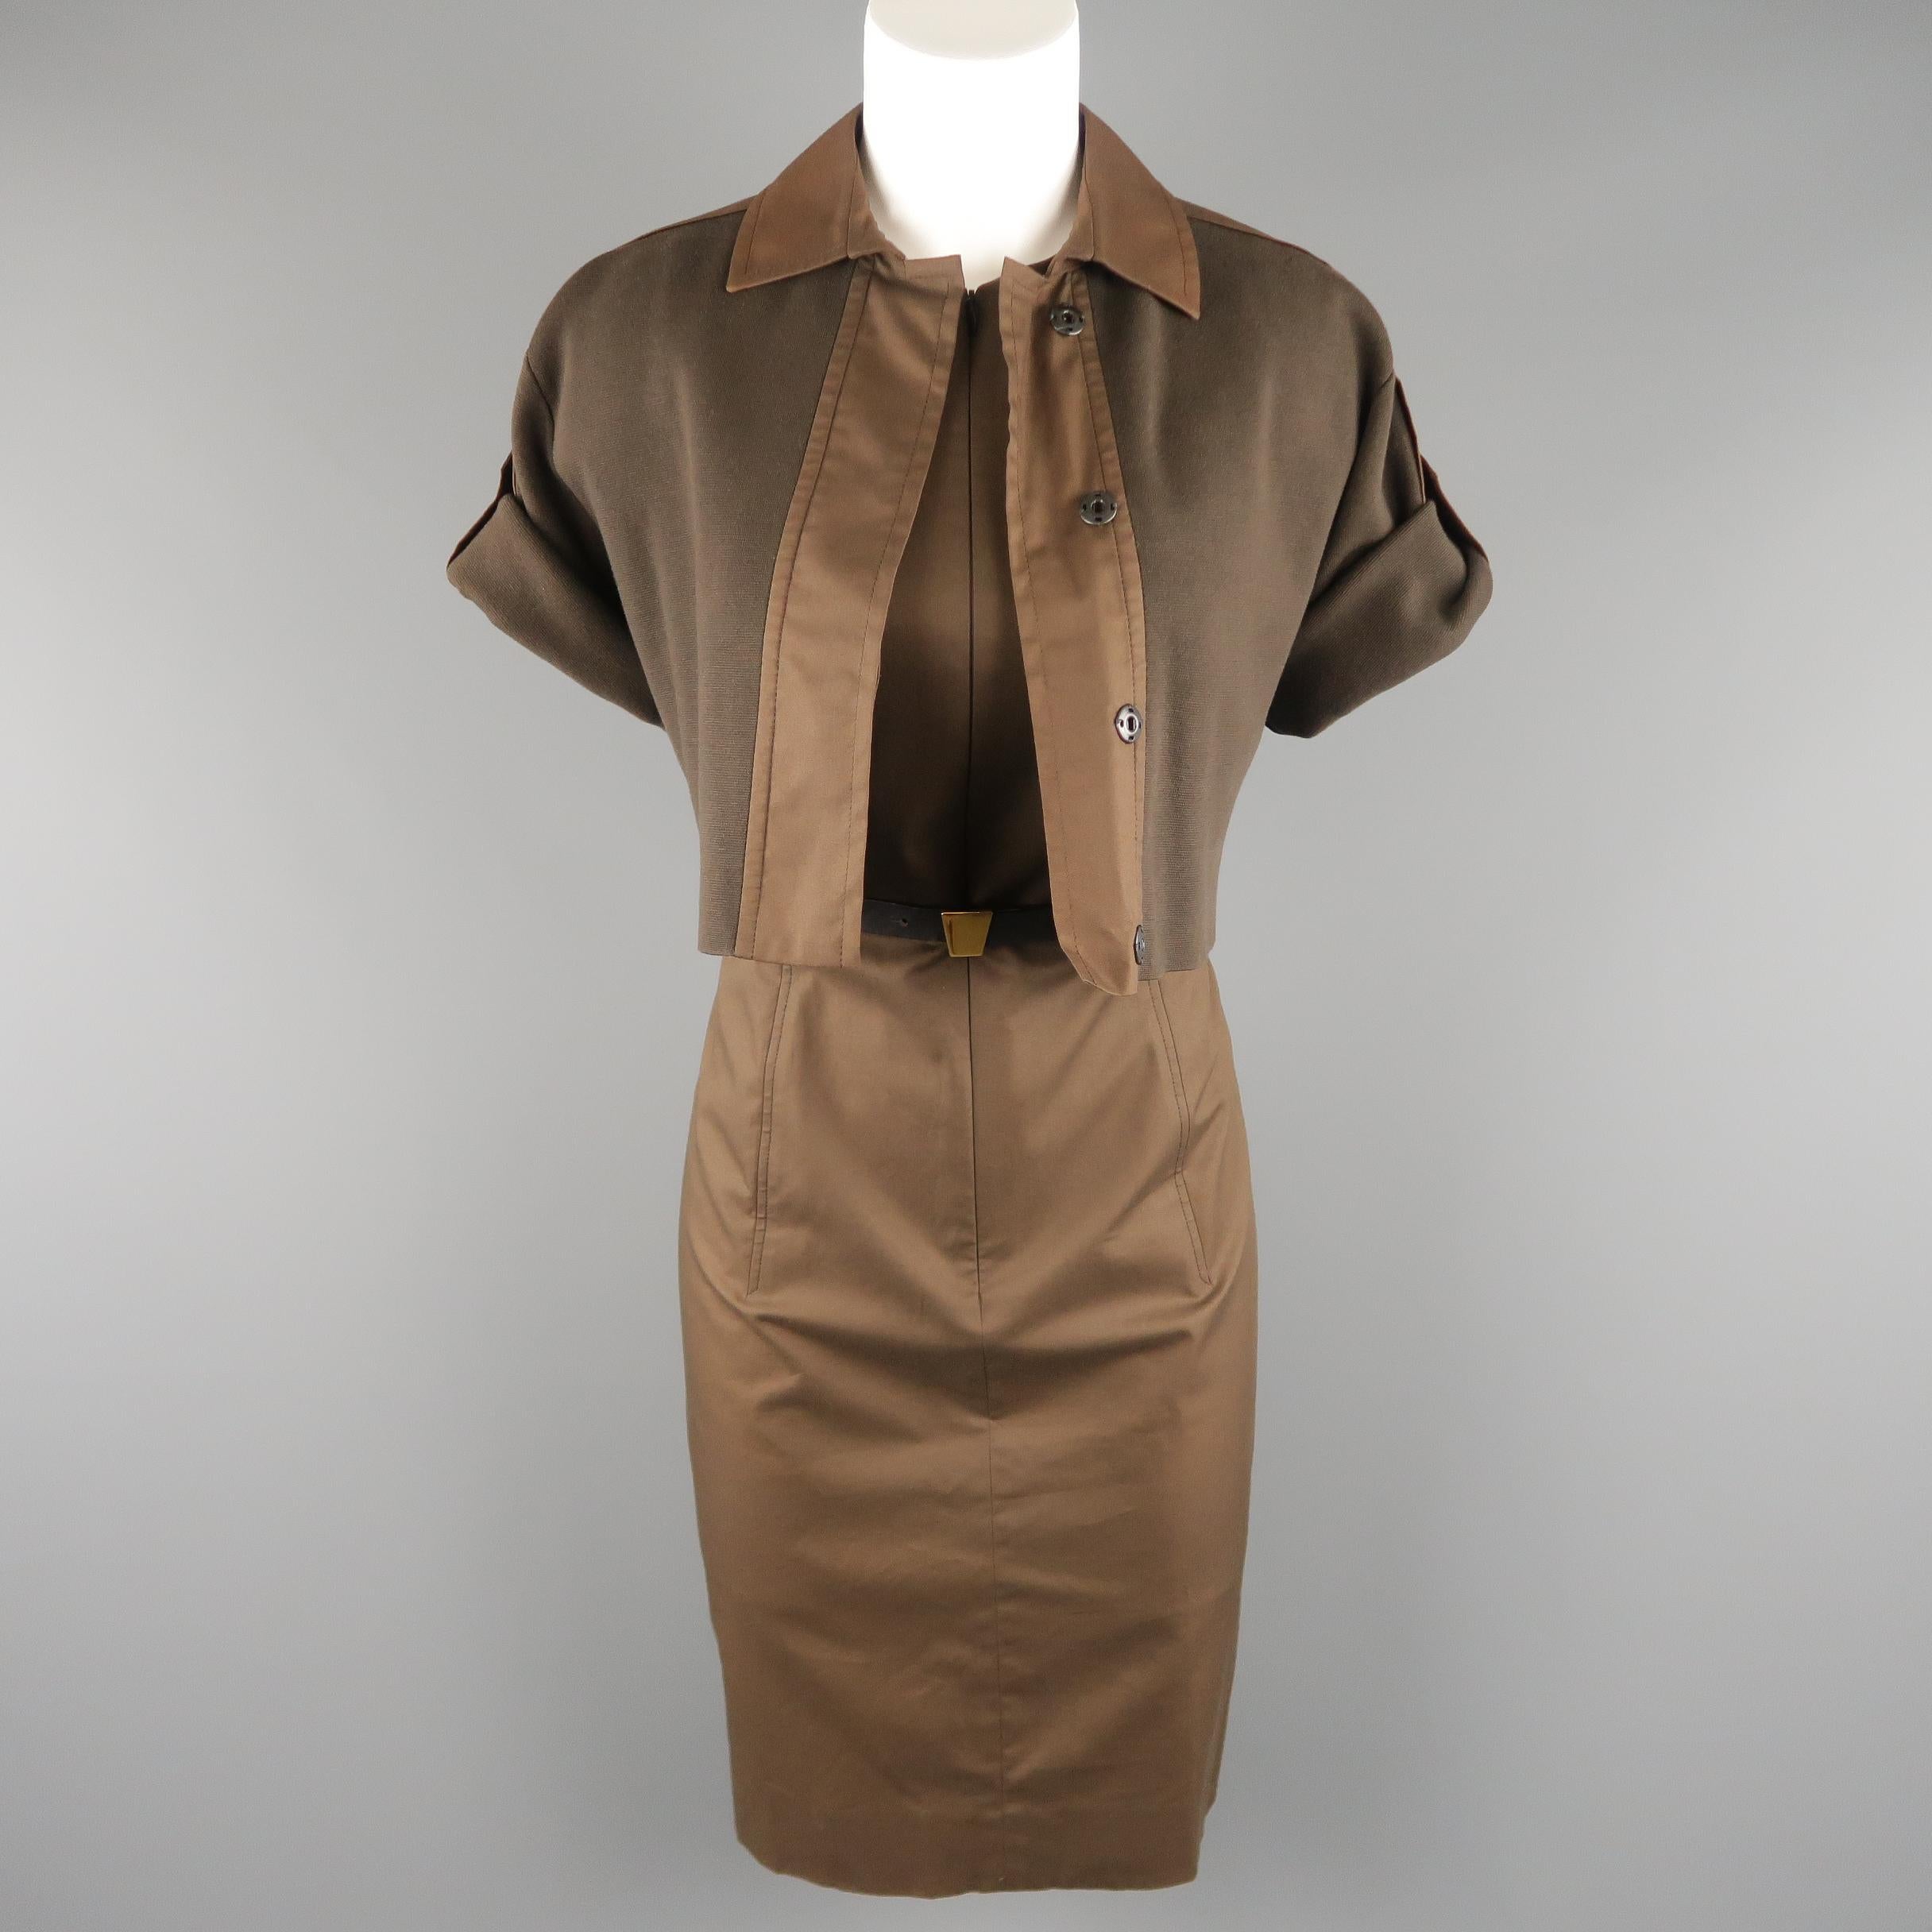 AKRIS ensemble includes a brown cotton sleeveless shift dress with stretch panels and leather belted waist with a knit rolled short sleeve safari style jacket.
 
Excellent Pre-Owned Condition.
Marked: 8
 
Measurements:
 
-Dress:
Shoulder: 13